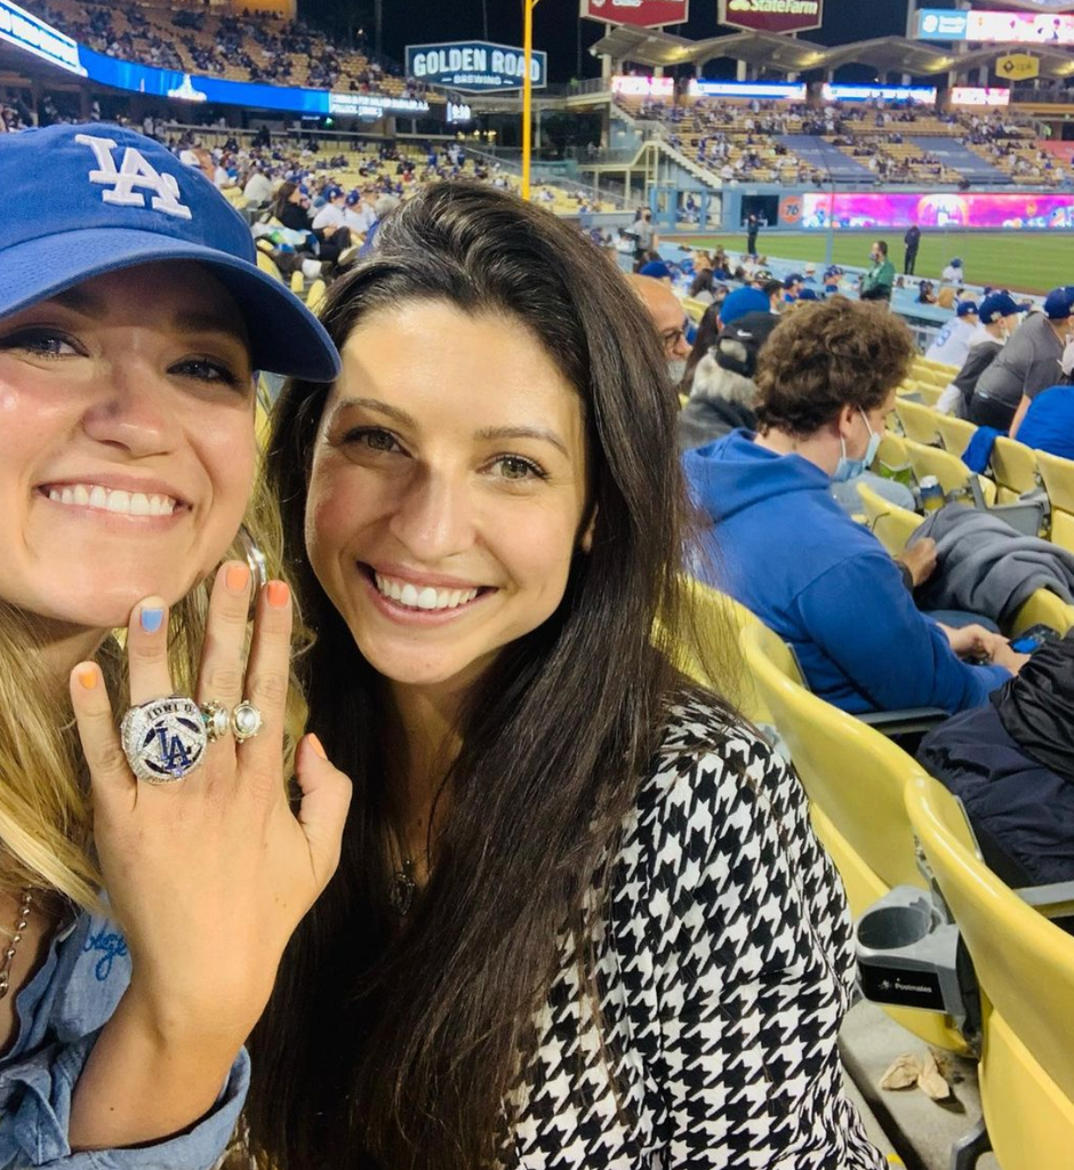 Famous Dodgers Fans -- For The Win!